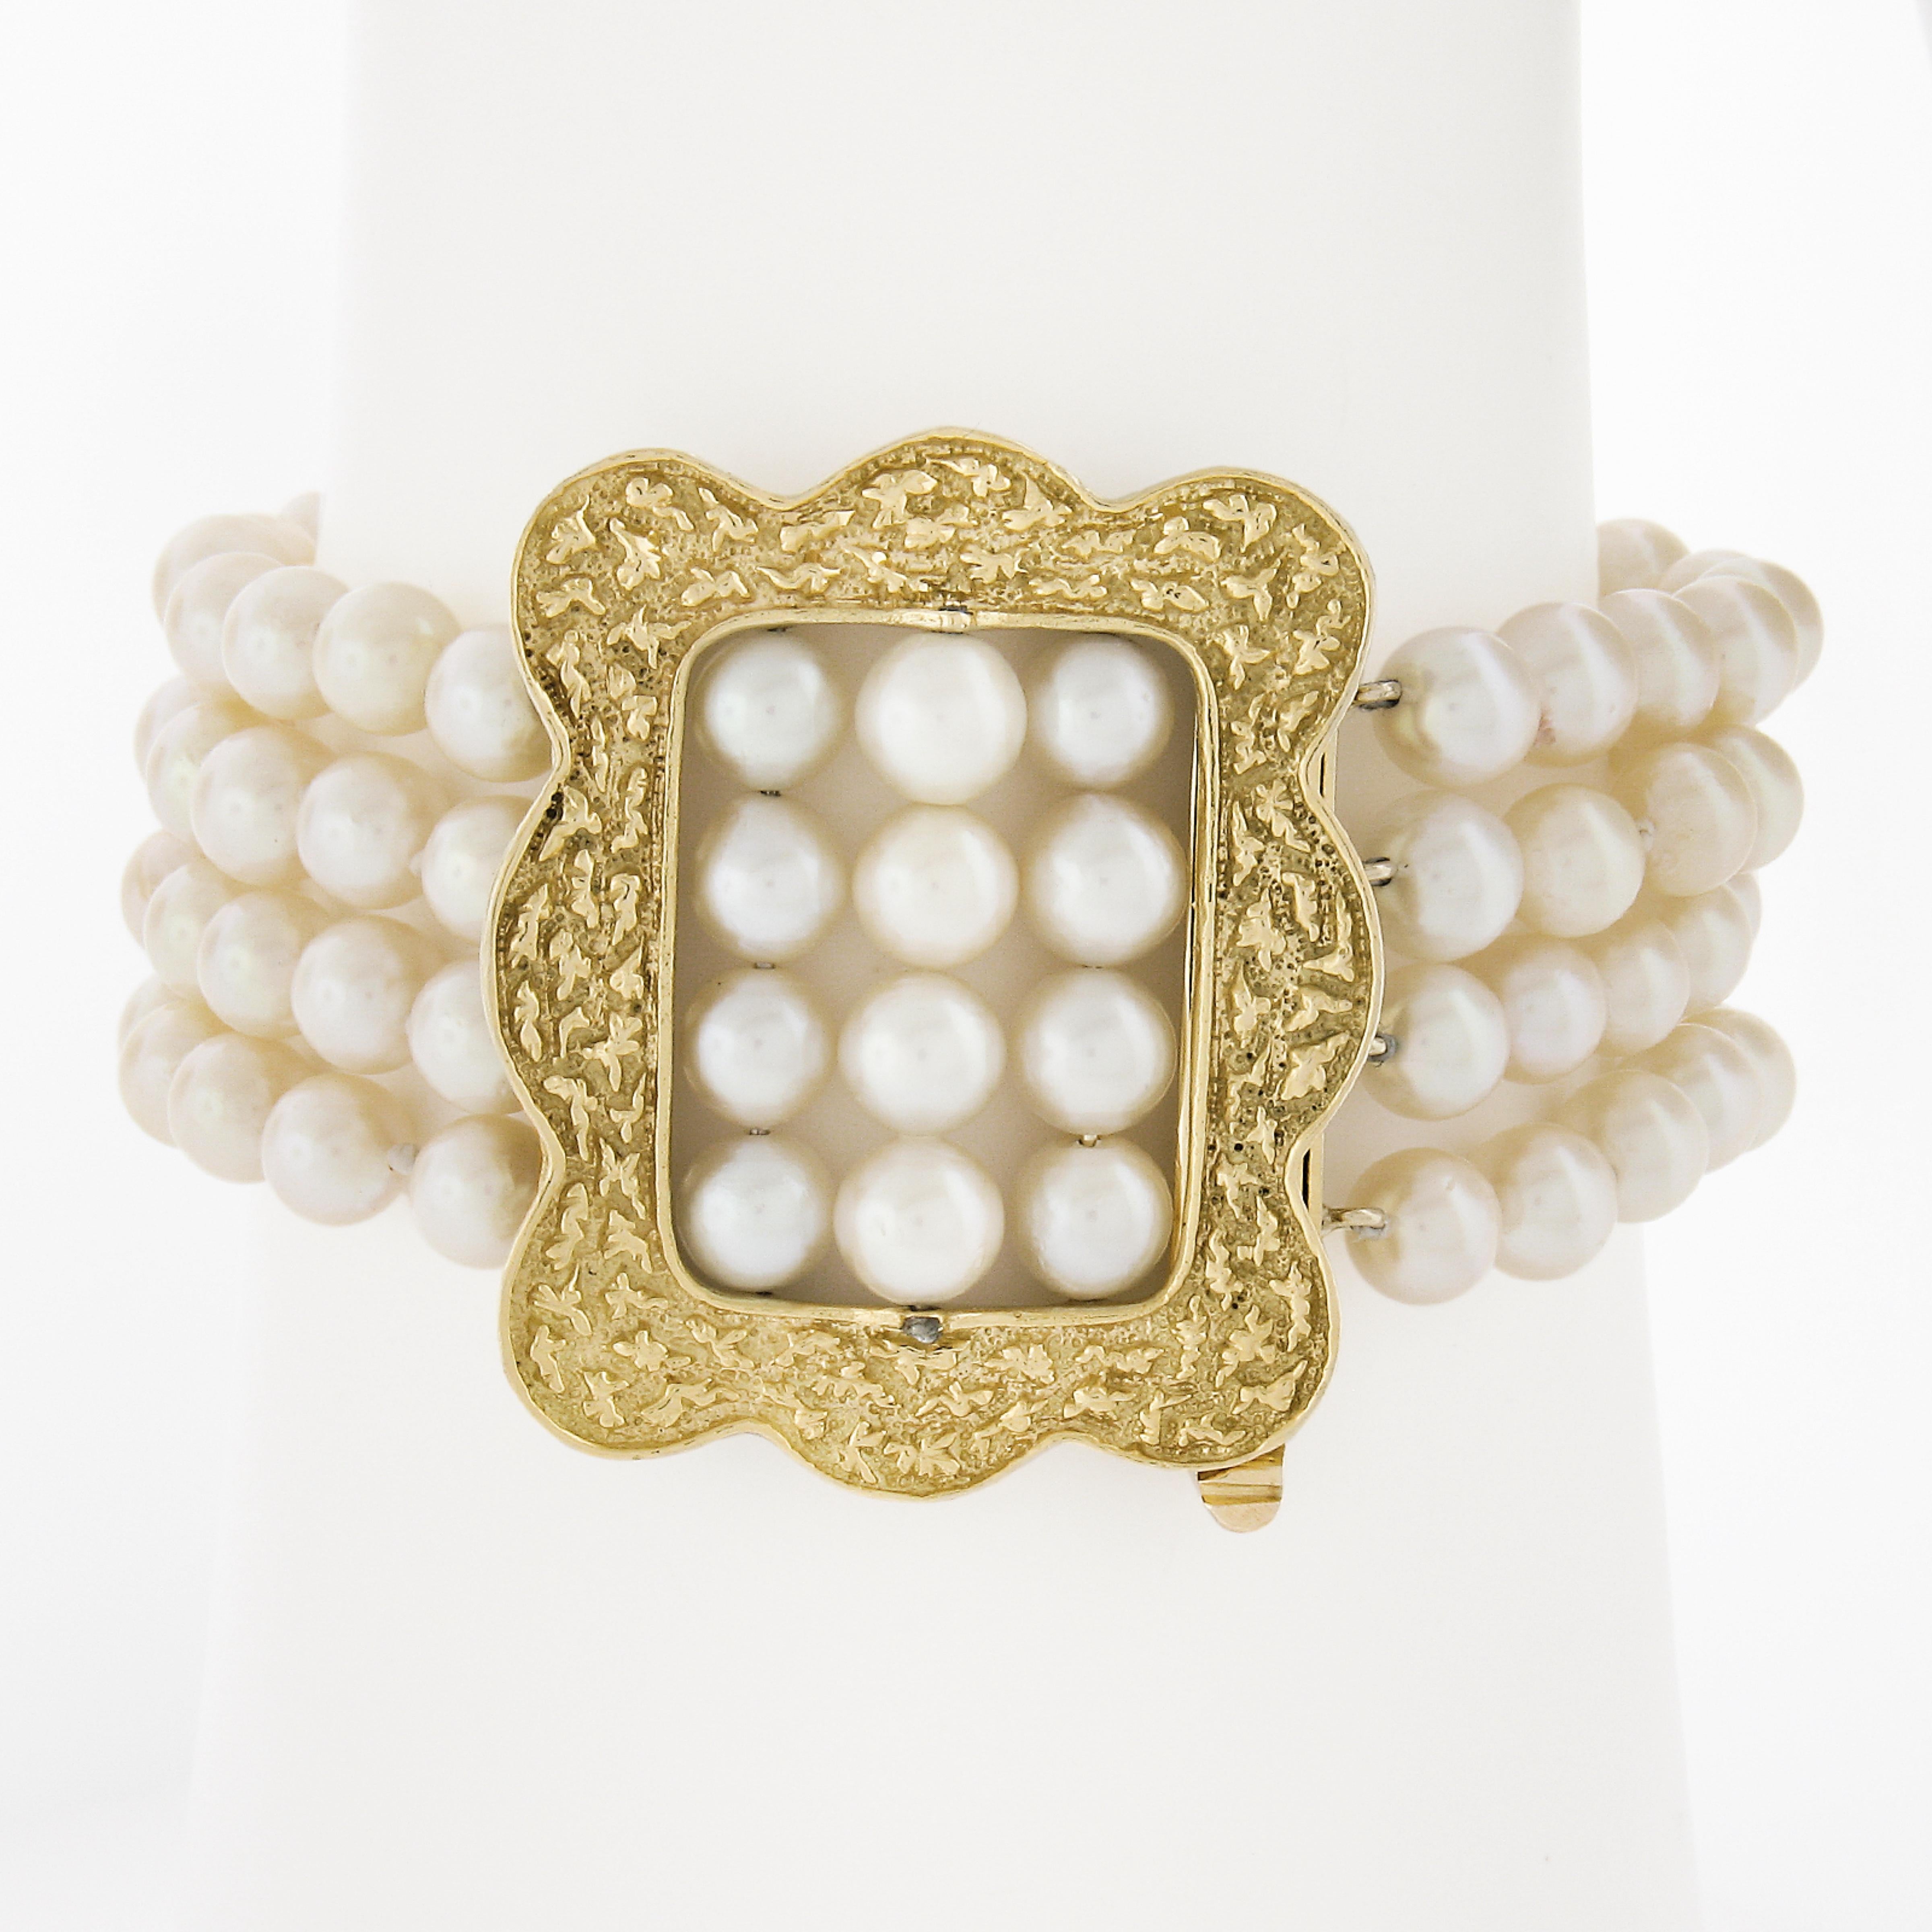 --Stone(s):--
108 Genuine Cultured Pearls - Round Shape - Strung - Nice White Creamy w/ Pink Overstone Color - Good Luster - 5-6mm each approx.

Material: Solid 14K Yellow Gold Clasp
Weight: 44.02 Grams
Type: 4 Strand Cultured Pearls
Length: Will